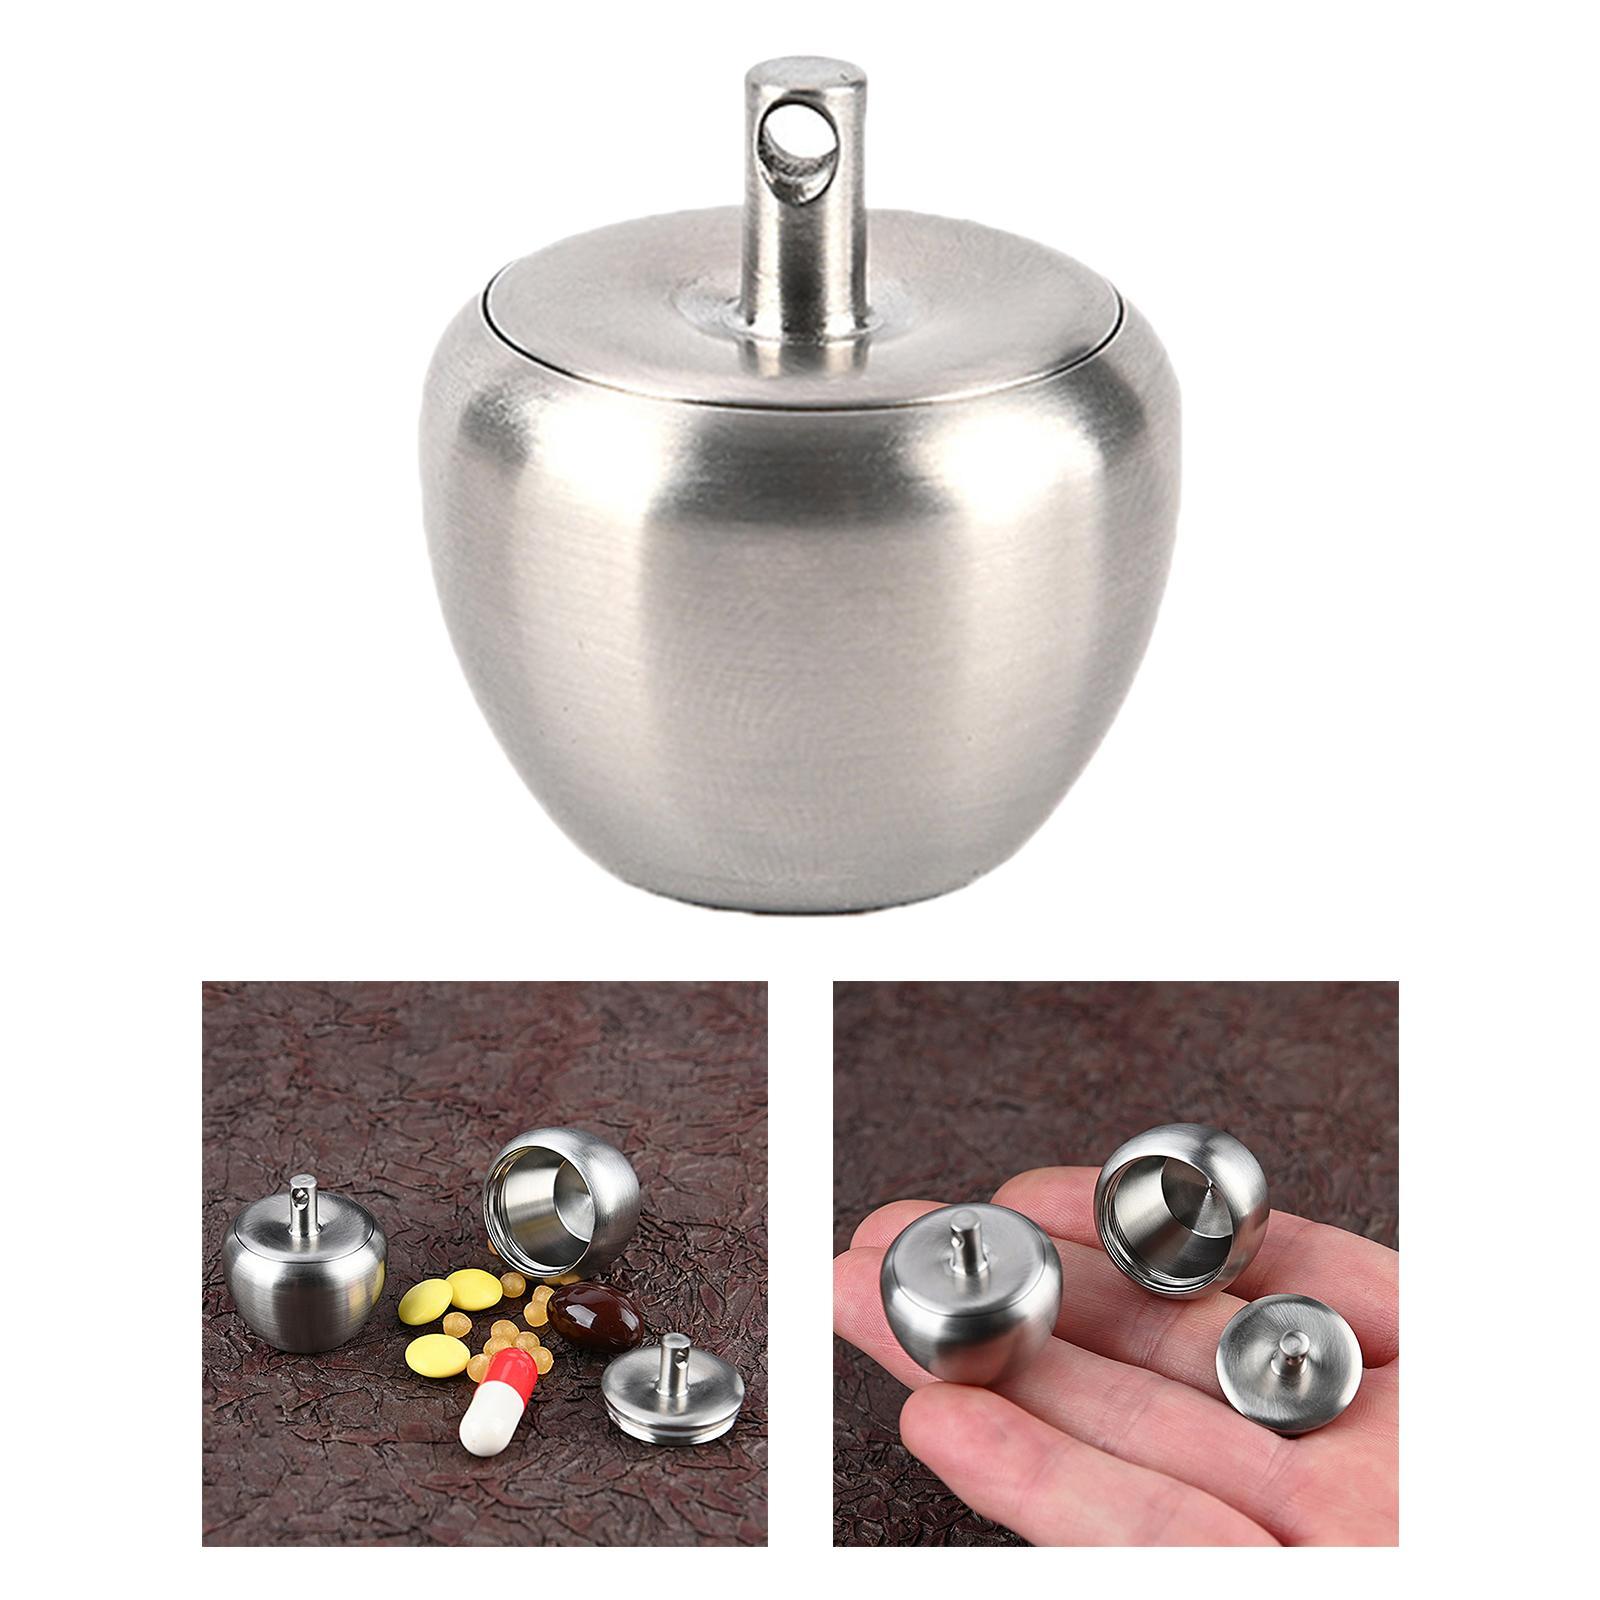 Stainless Steel Pill Box Pocket Mini Waterproof Organizer Carrier Keychain for Outdoor Camping